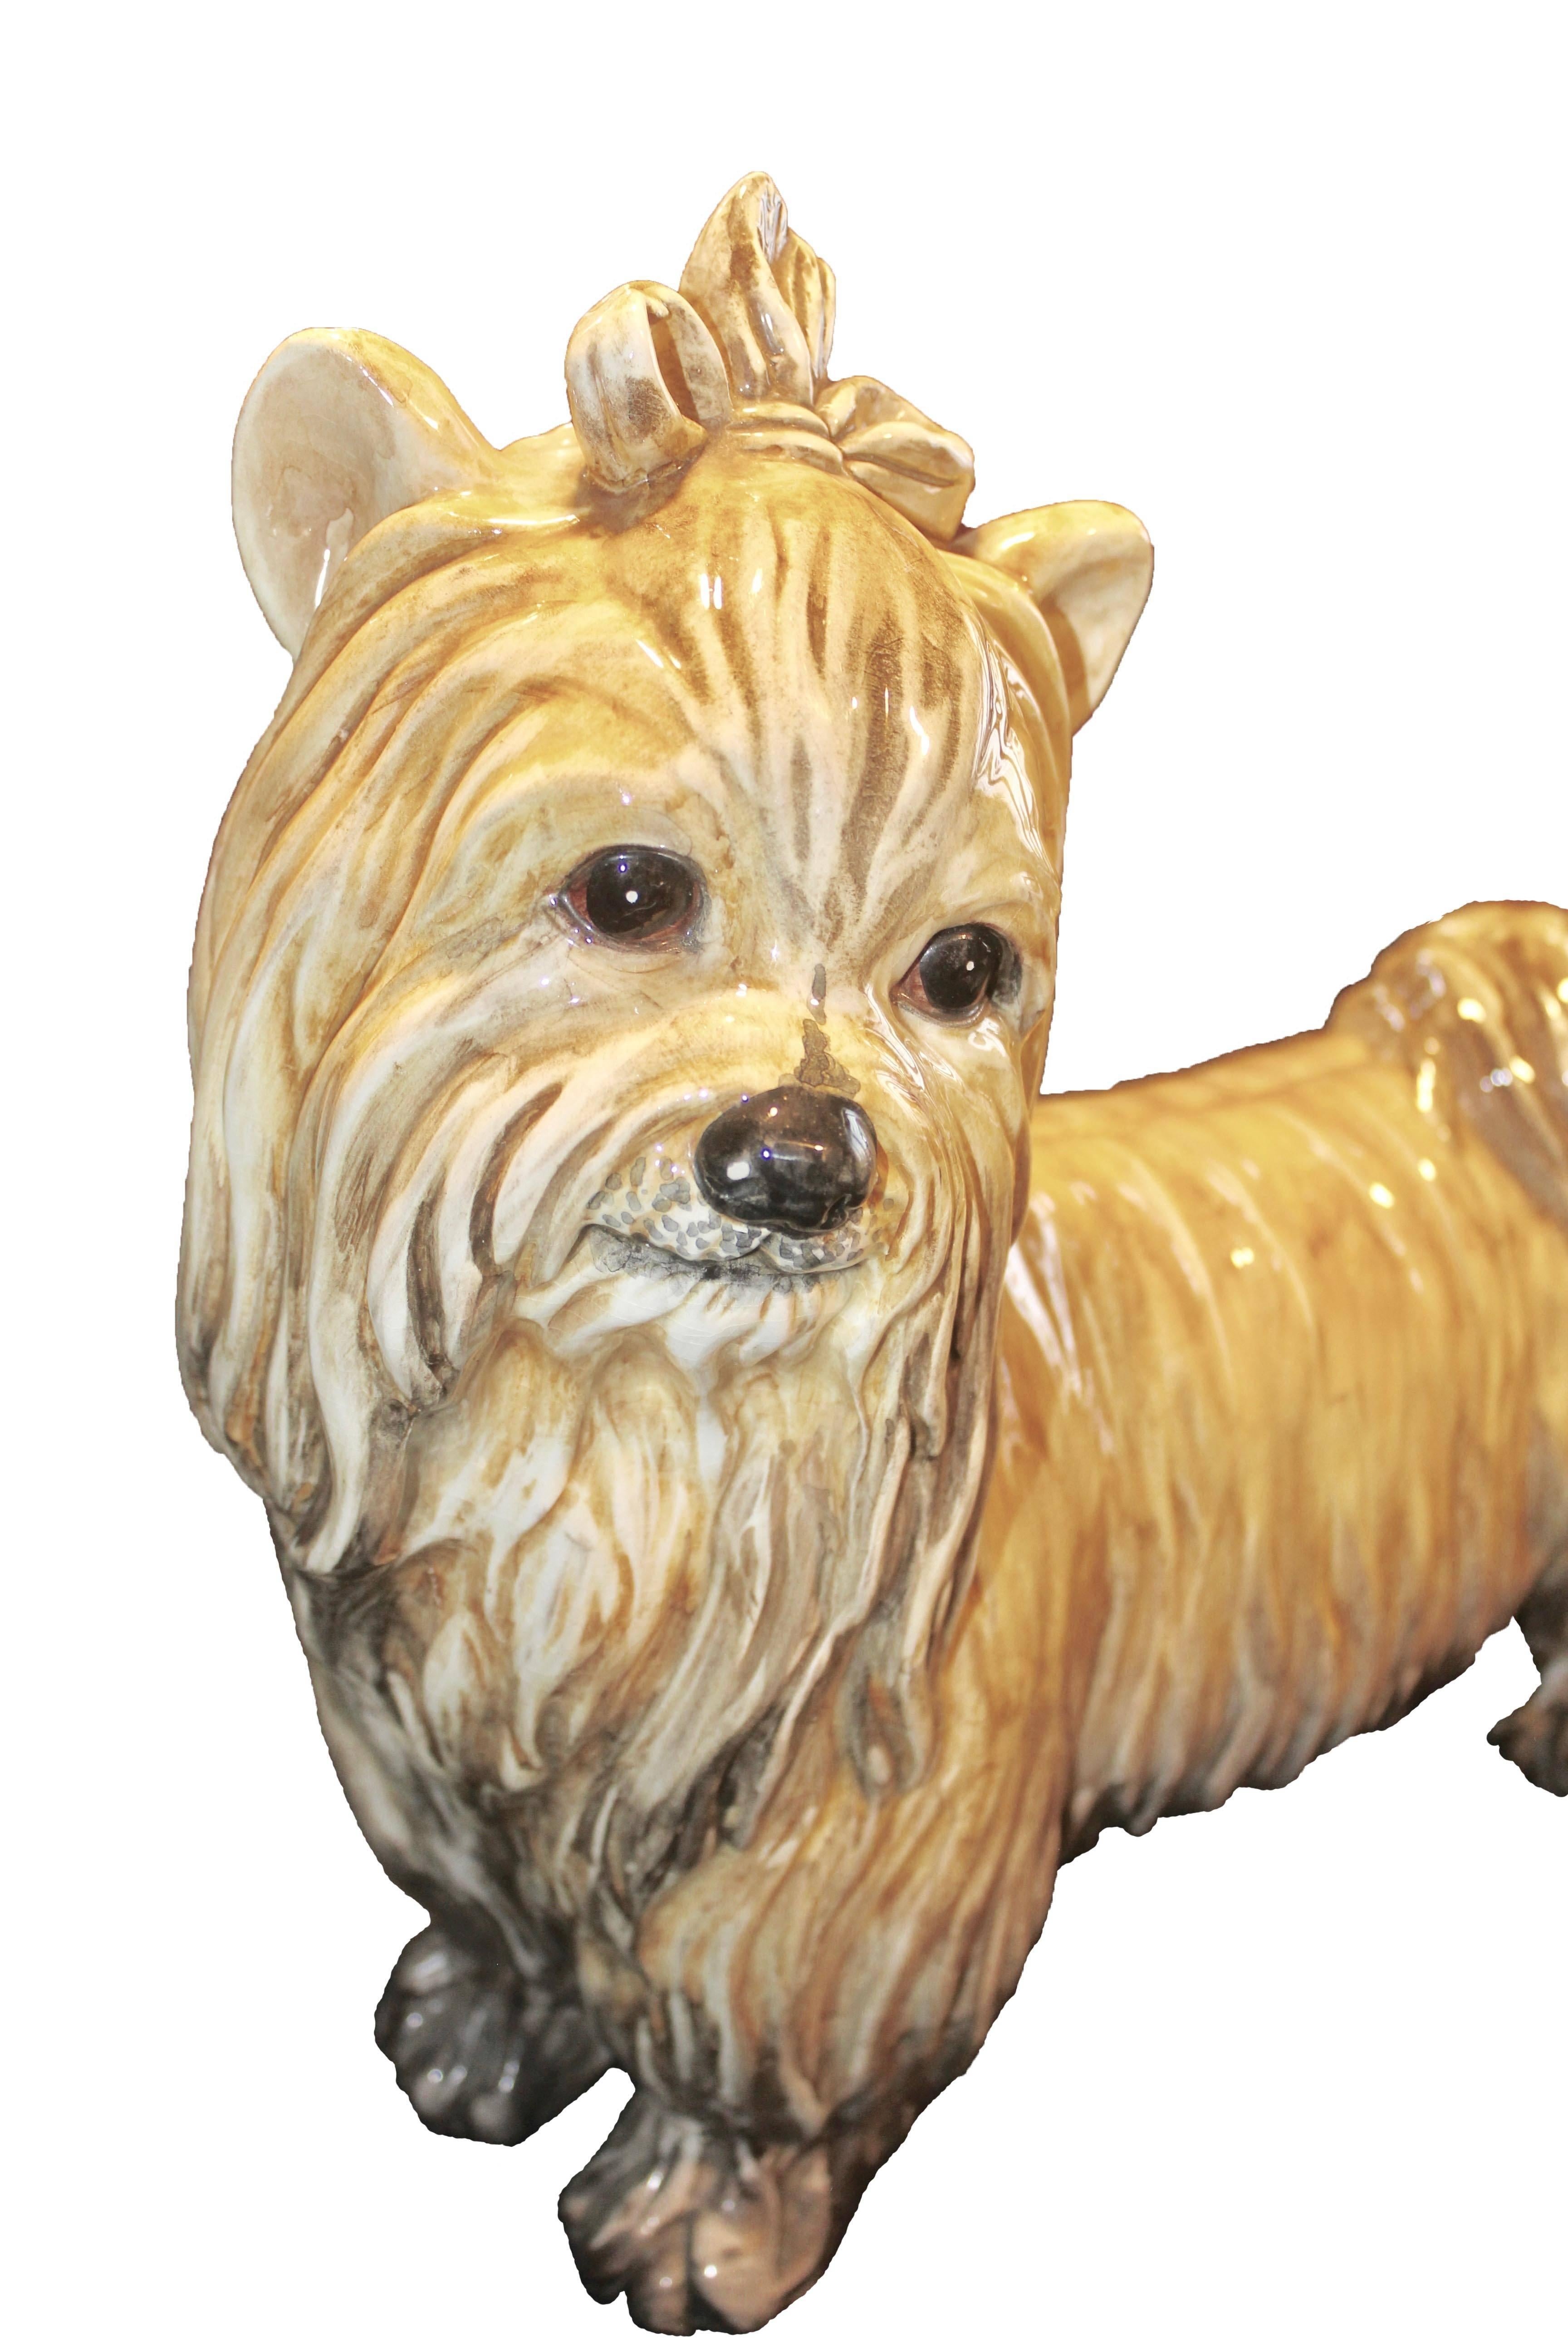 This stylish dog sculpture dates to the late 1950s-1960s and was fabricated in Italy.
The piece is in excellent condition and a real beauty!

Available other Art Nouveau , Art deco 
and Vintage pieces:
Please kindly check our storefront and